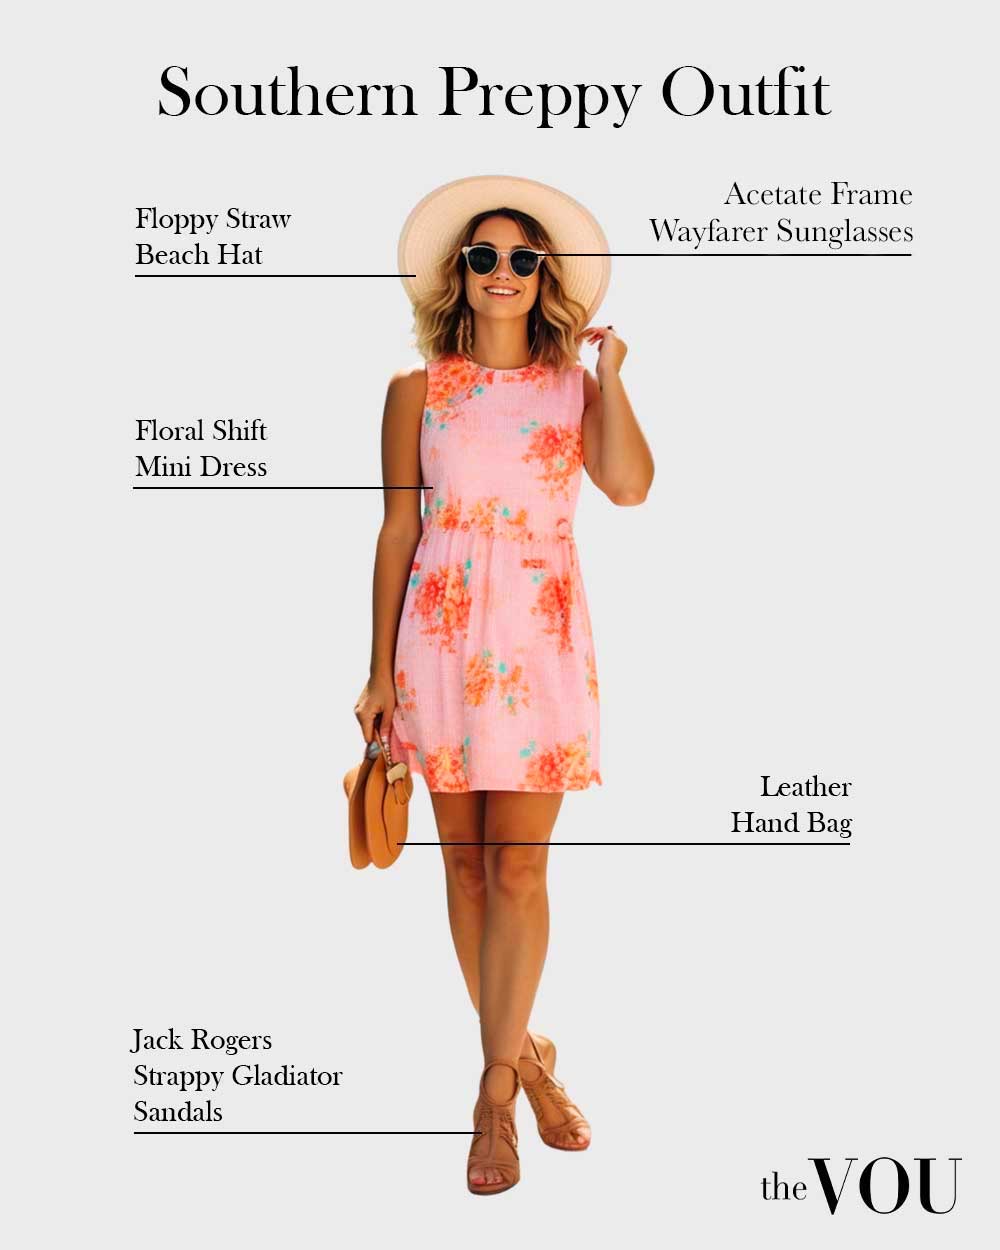 Southern Preppy Outfit with floral shift dress and sandals